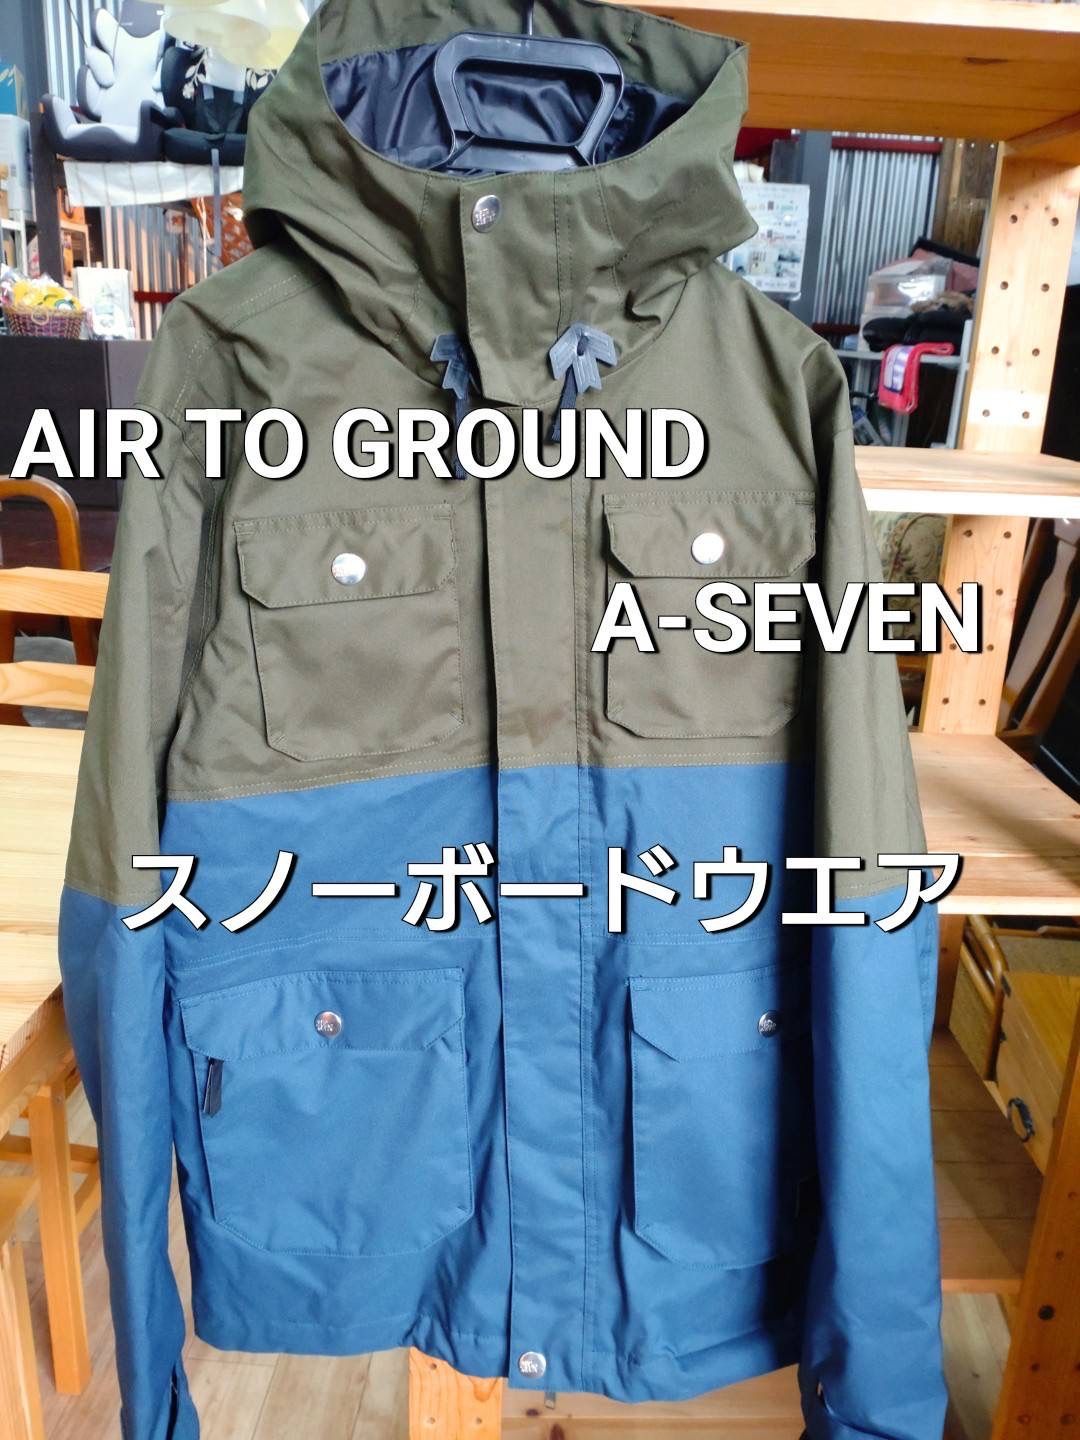 Air to ground a-sevenスノーボードウェアセット